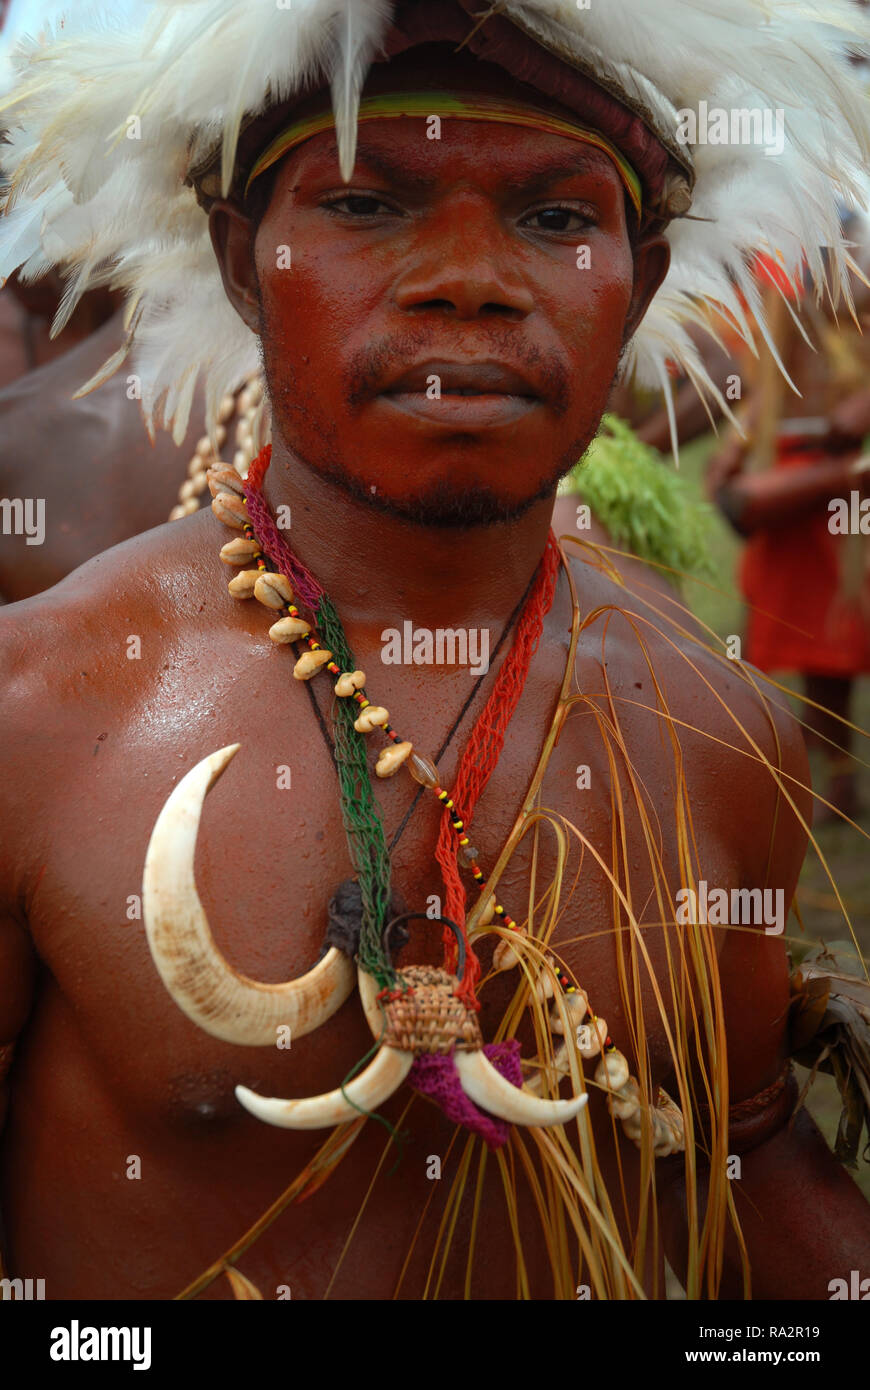 Colourfully dressed and face painted man with a feather head dress as part of the annual Sing Sing in Madang, Papua New Guinea. Stock Photo